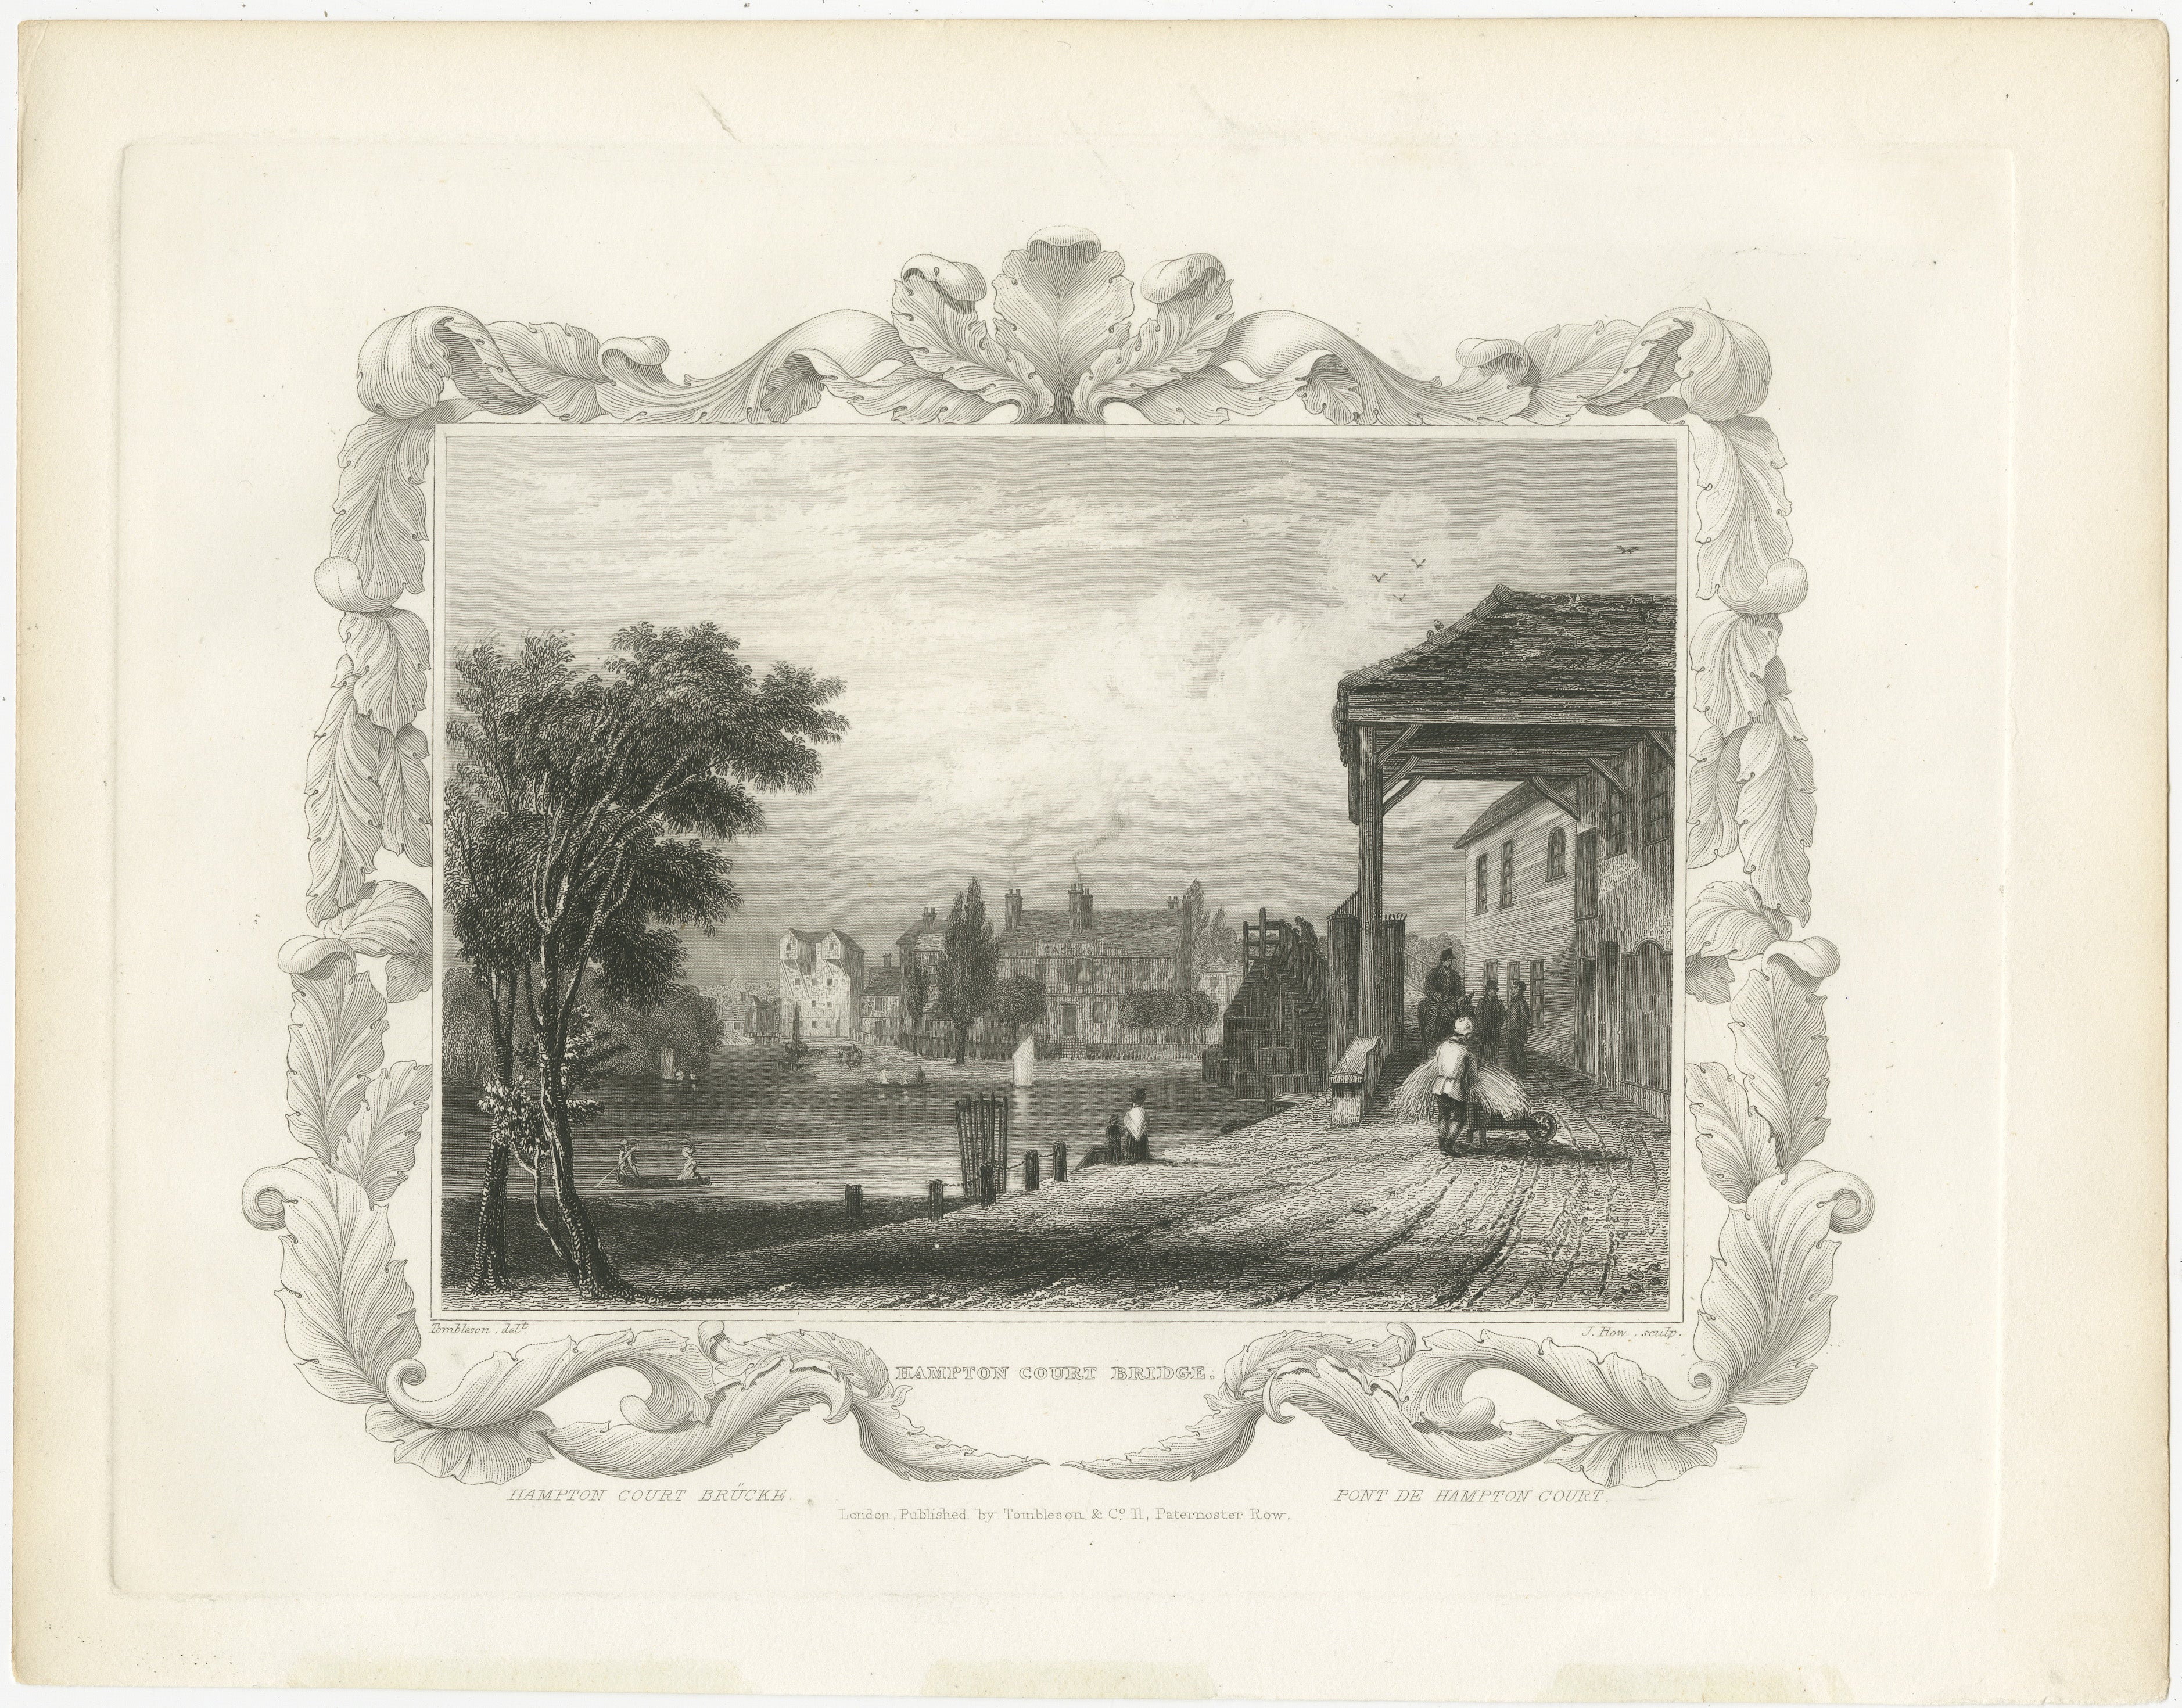 A detailed engraving of Hampton Court Bridge, situated on the River Thames near the palace of Hampton Court. 

This artwork displays a serene scene of the riverside with the bridge in the distance and a building to the right foreground, likely a